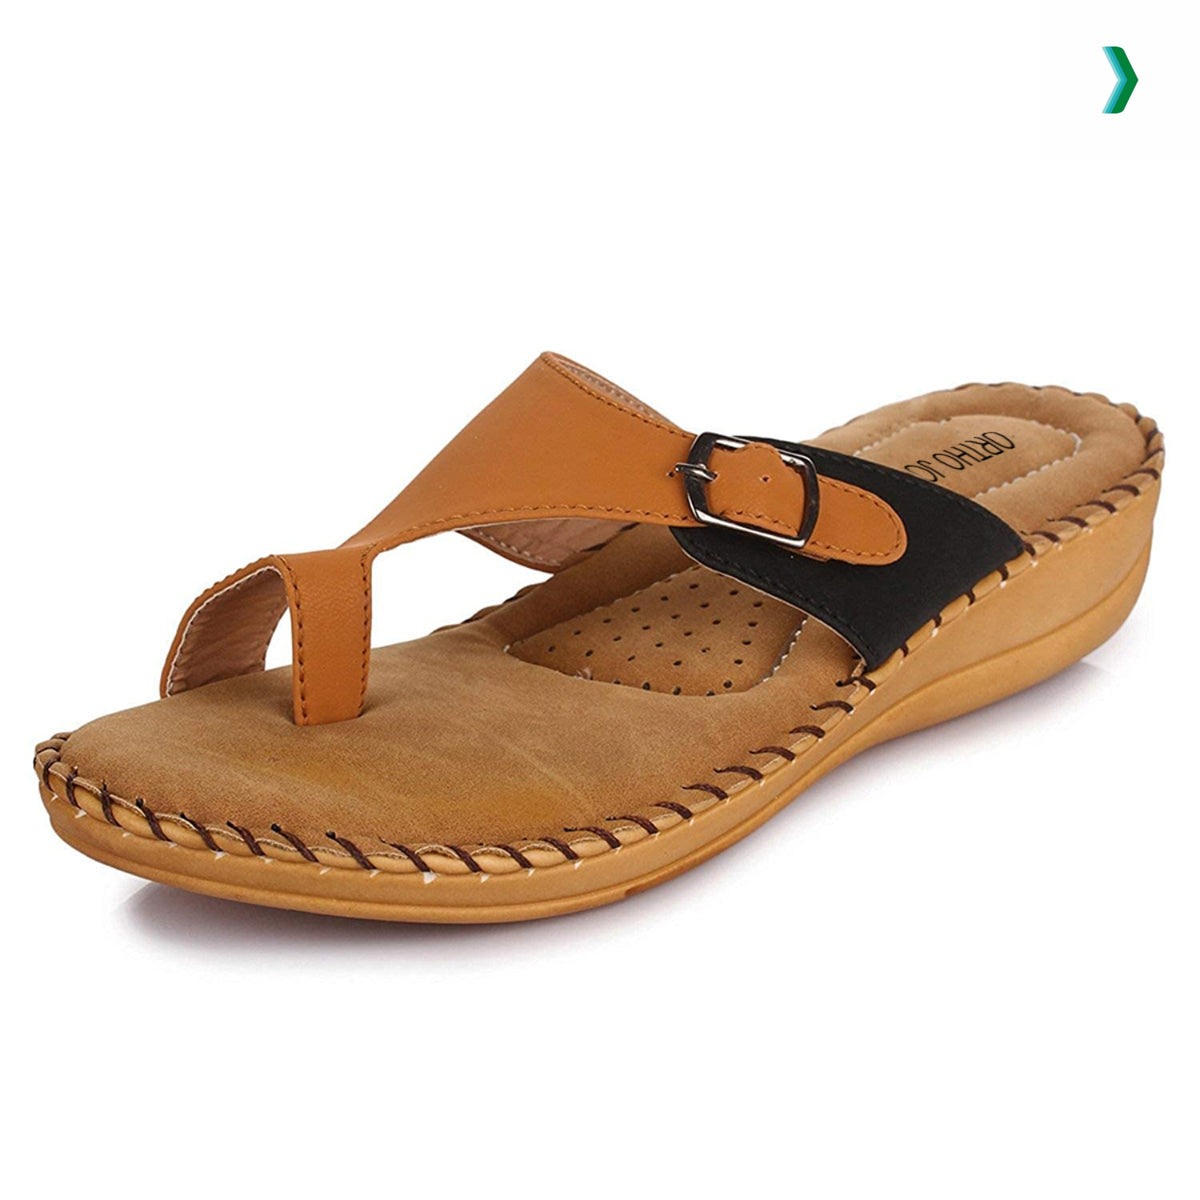 extra soft slippers for ladies, soft doctor chappal for ladies, best ortho slippers